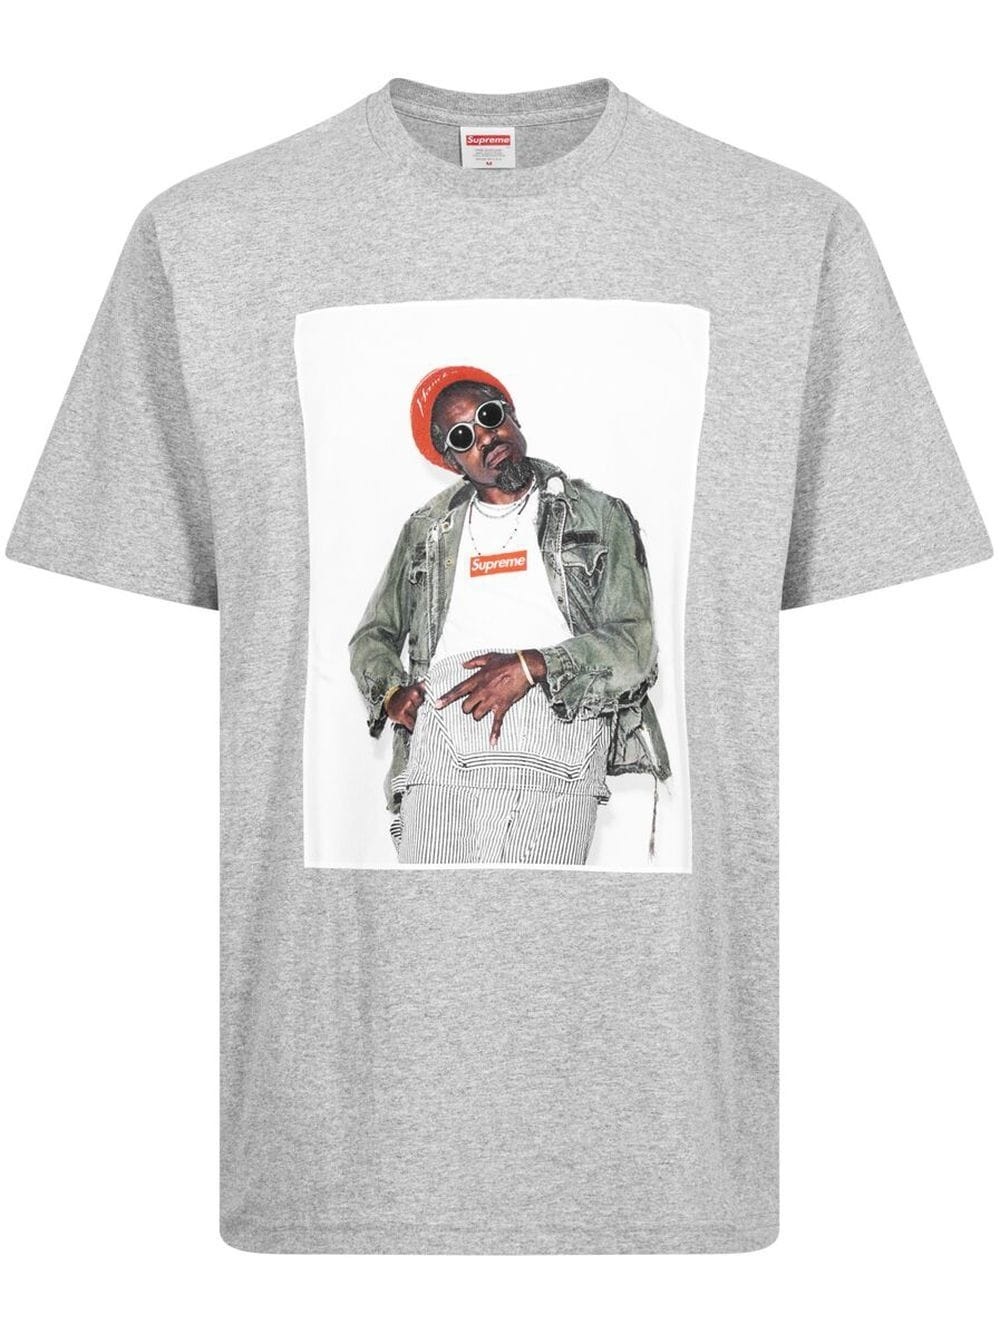 Andre 3000 T-shirt - 1